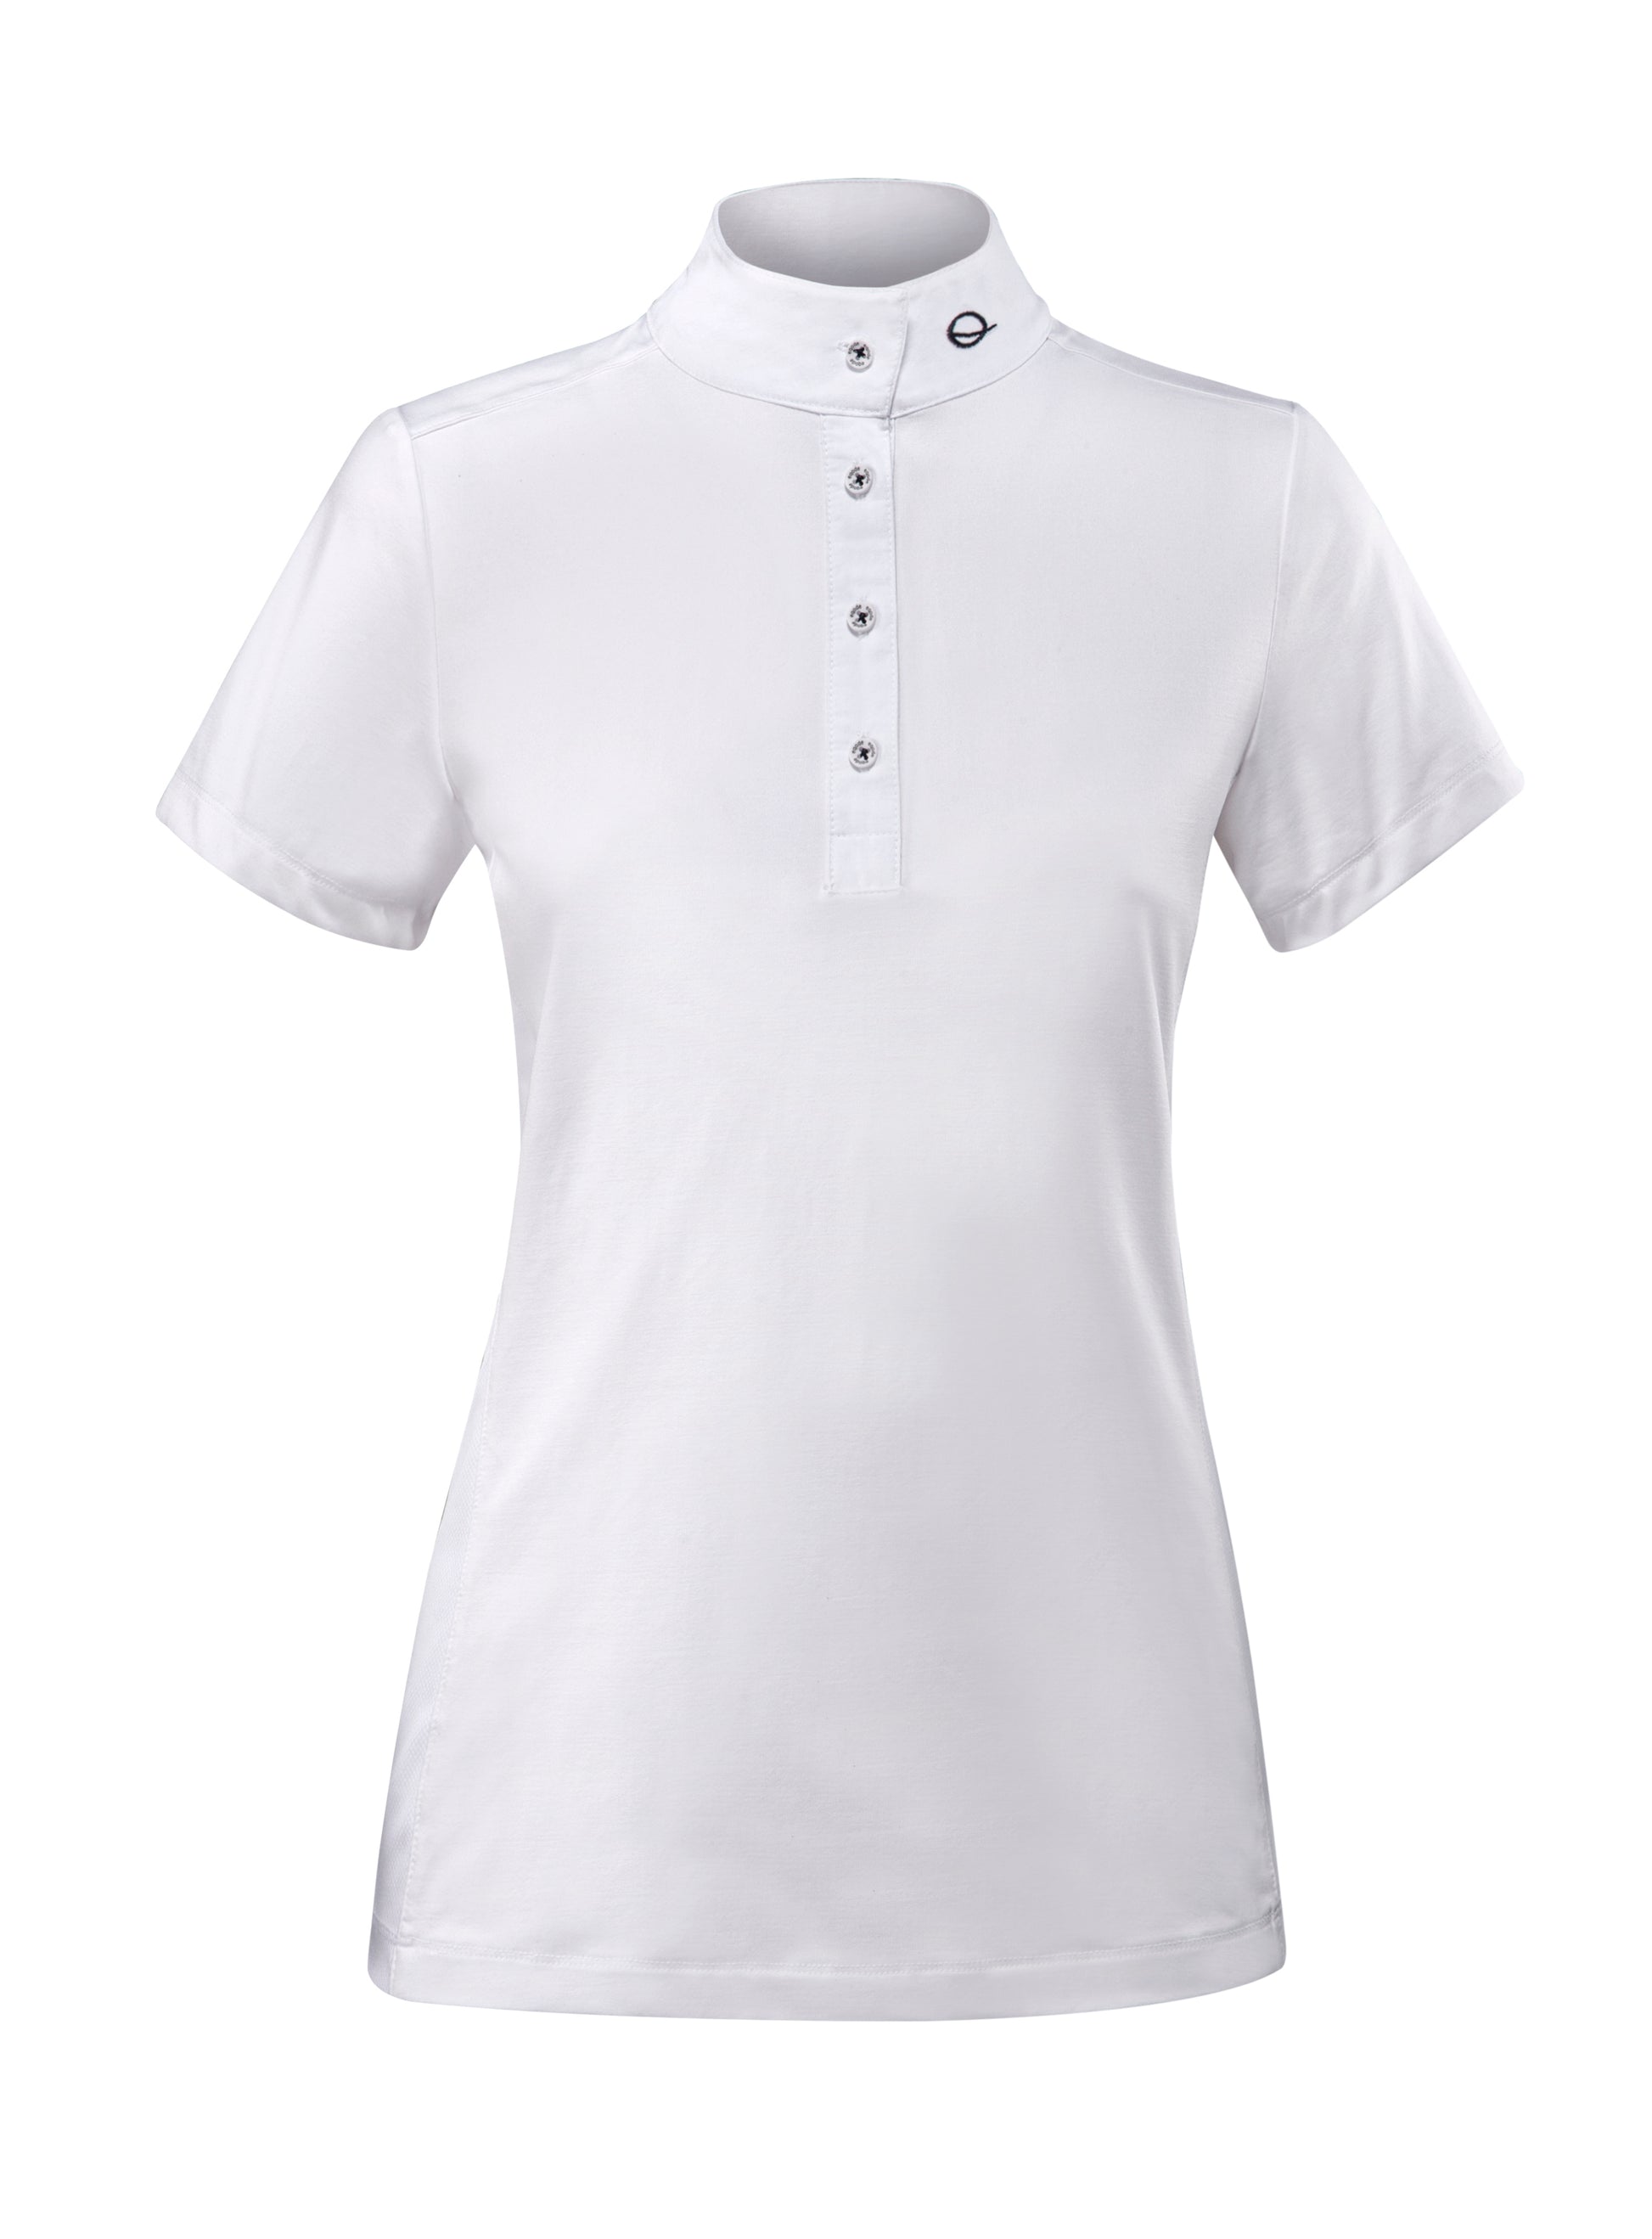 Polo Competizione Donna | Eqode by Equiline | El gaucho store